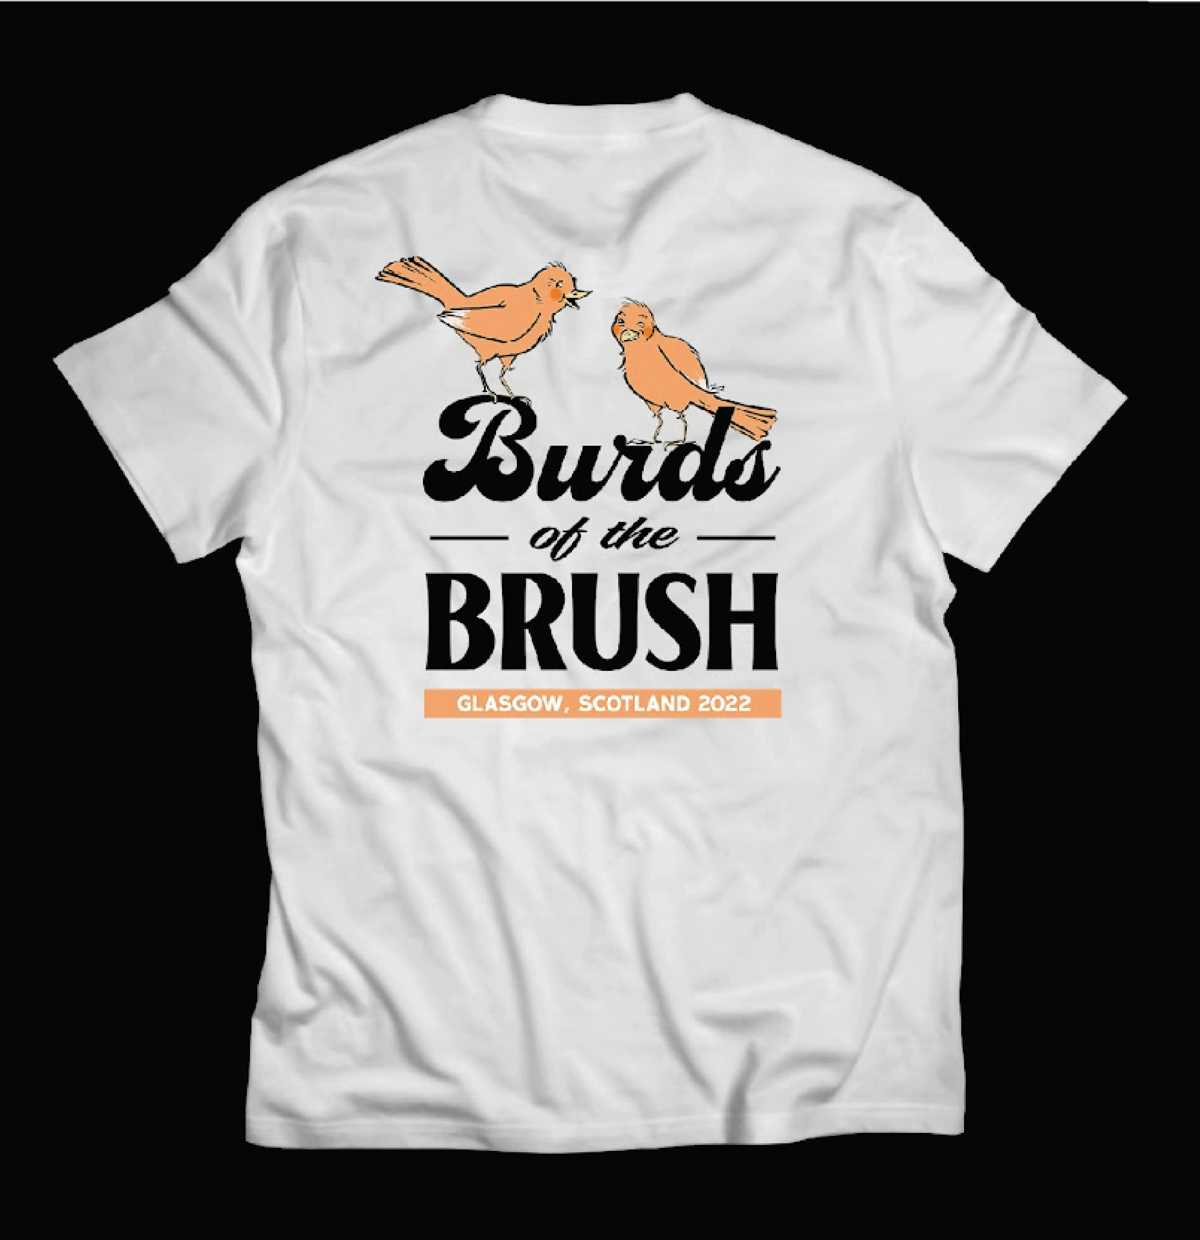 Image of Burds of the Brush tees